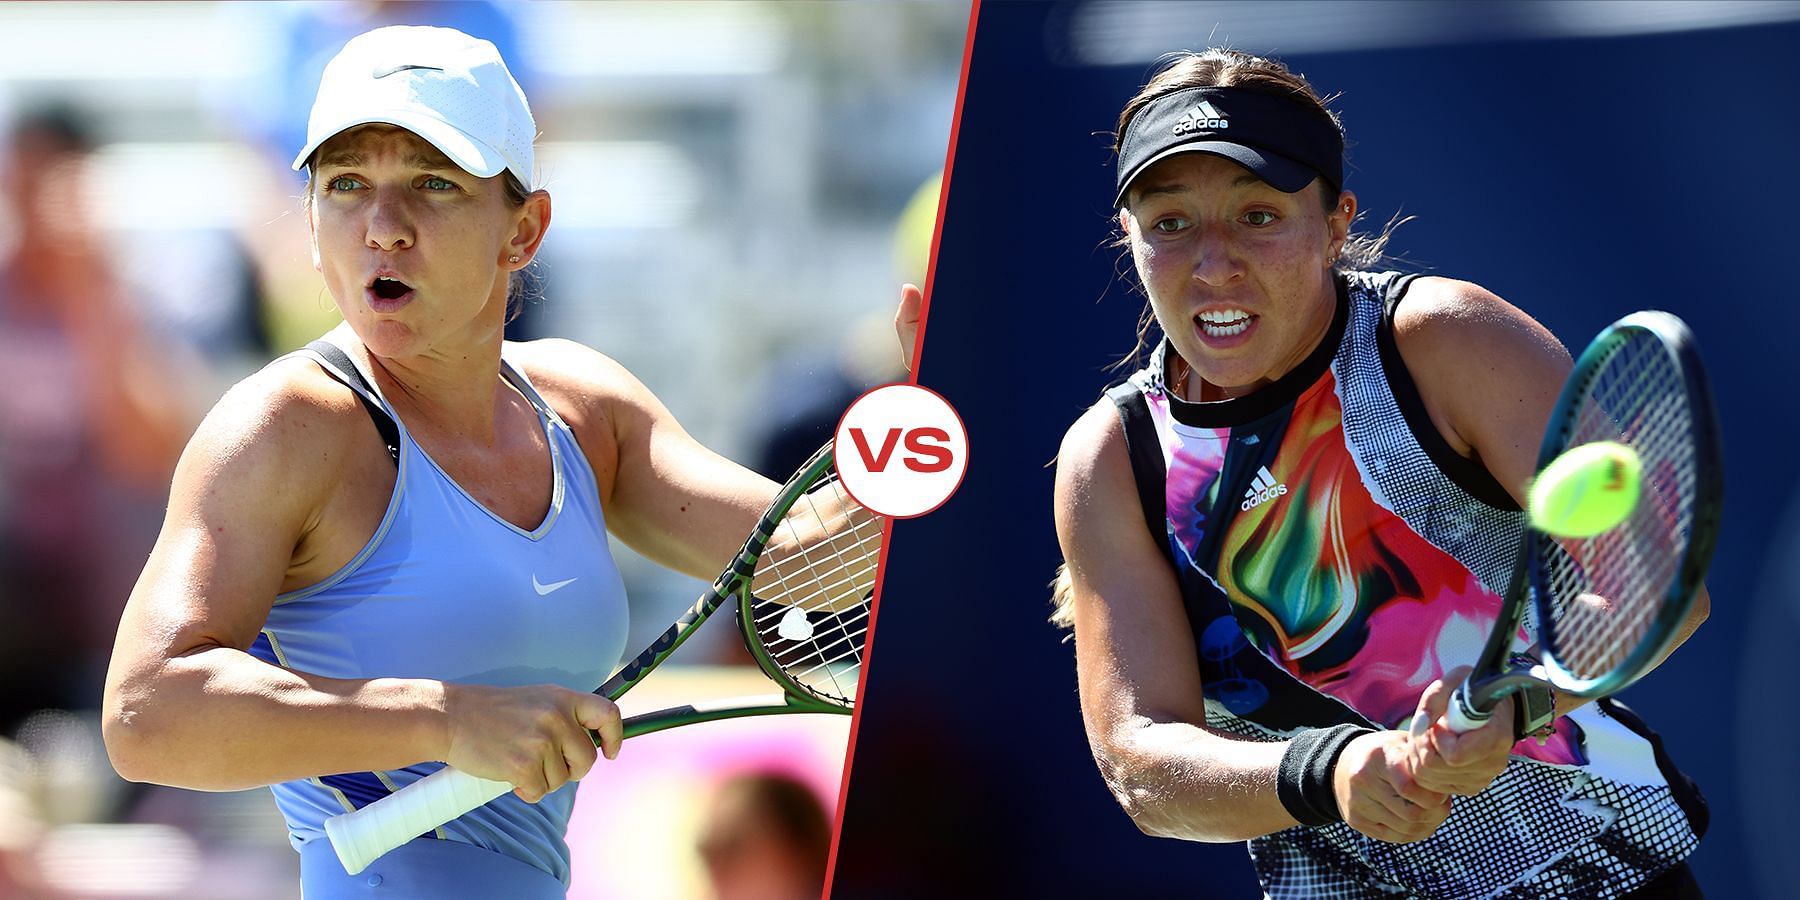 Jessica Pegula and Simona Halep will face off in the semifinals of the Canadian Open